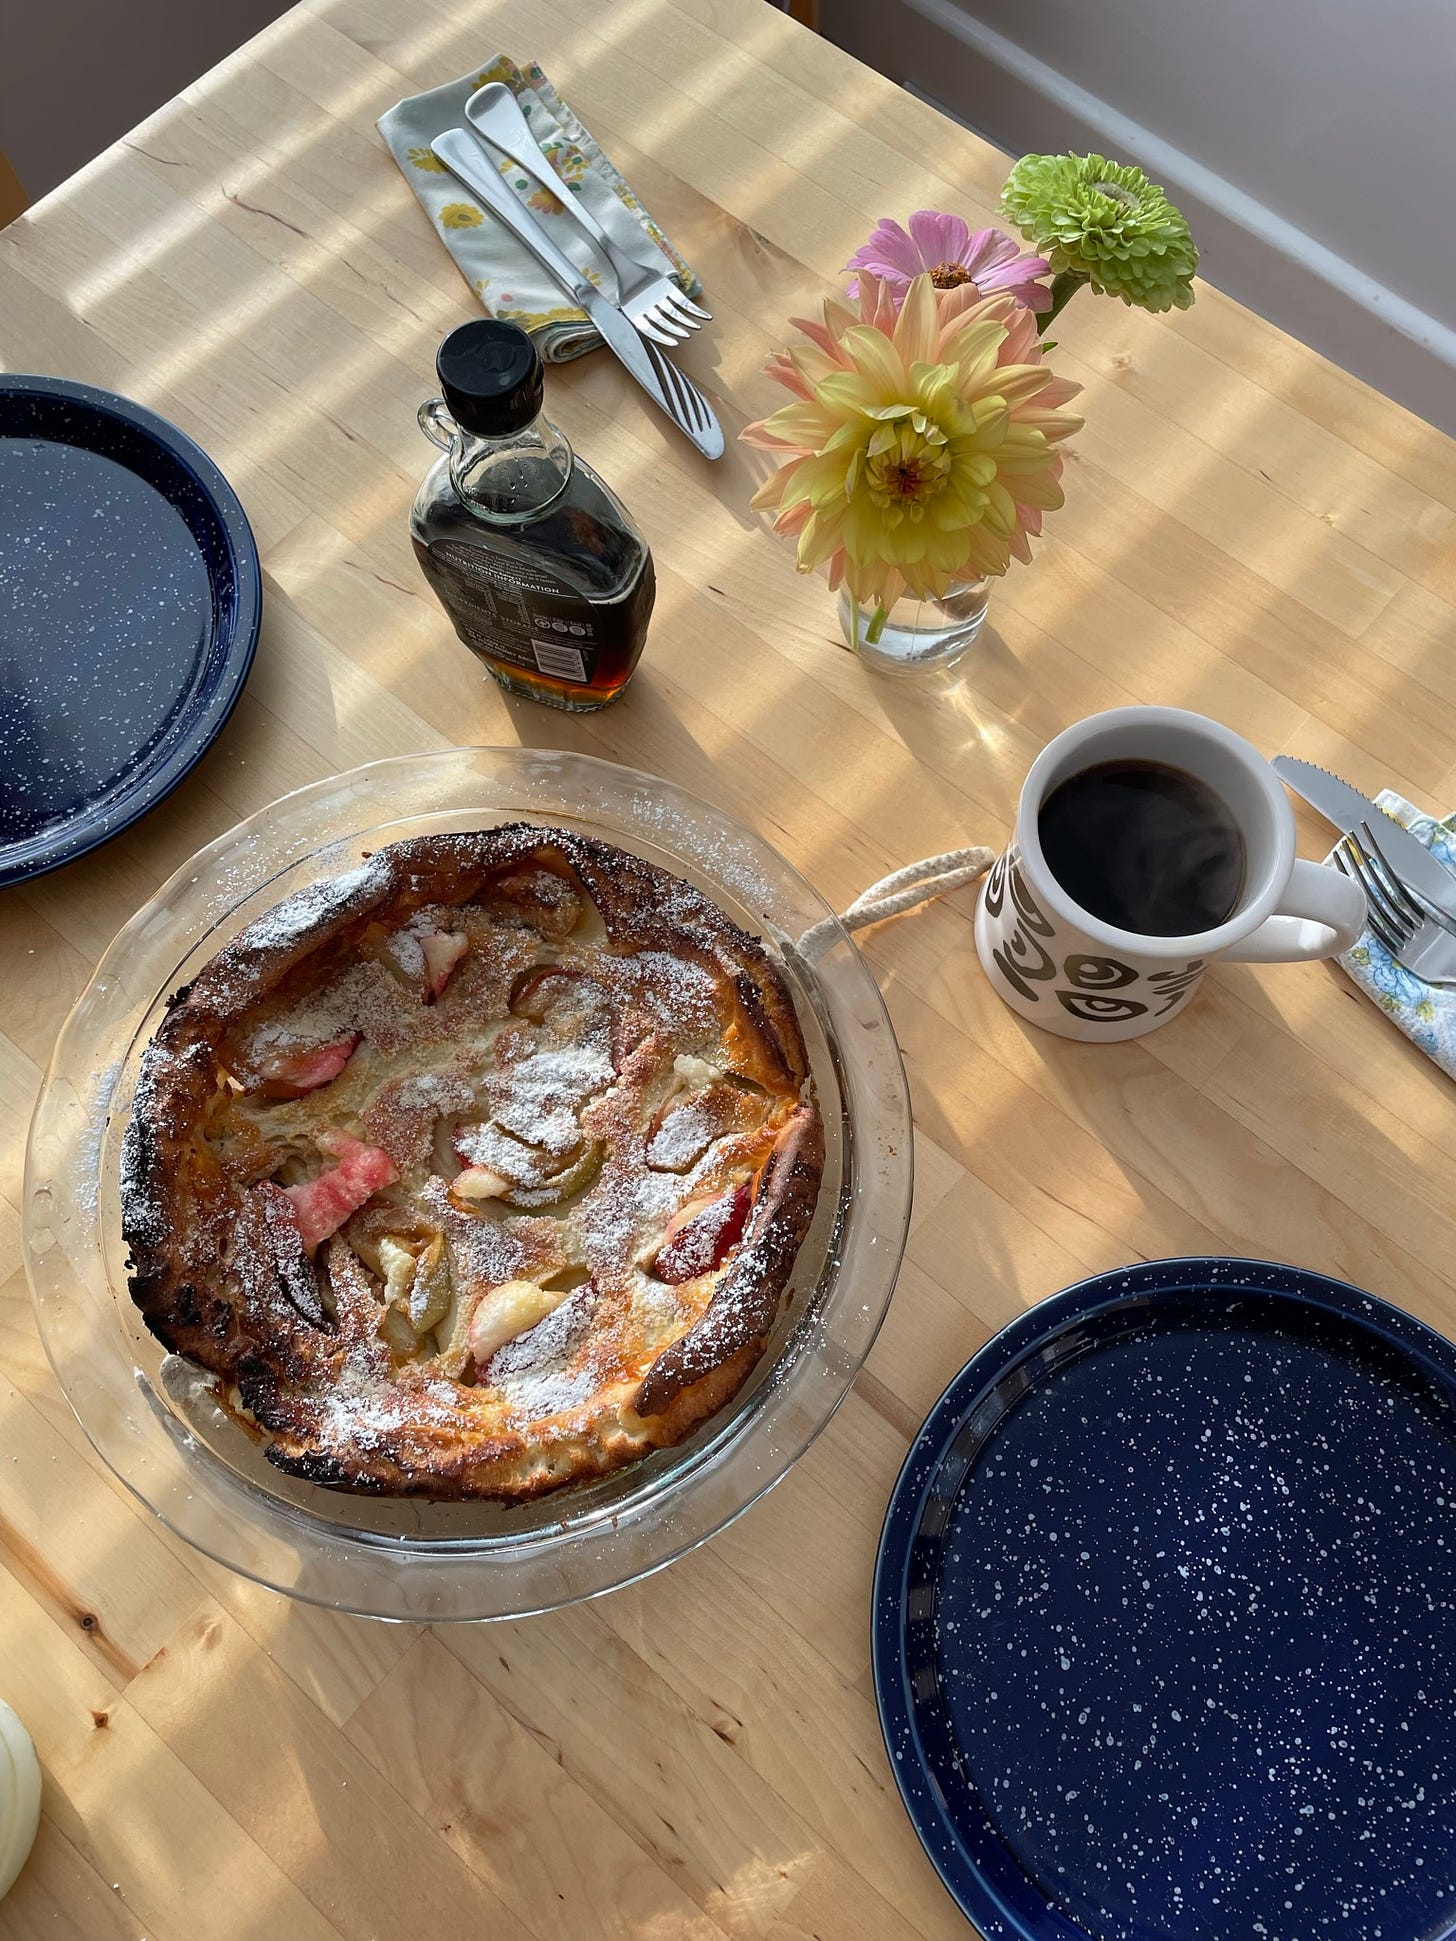 Overhead shot of a dining table with filter coffee, an apple dutch baby, plates, cutlery and maple syrup.